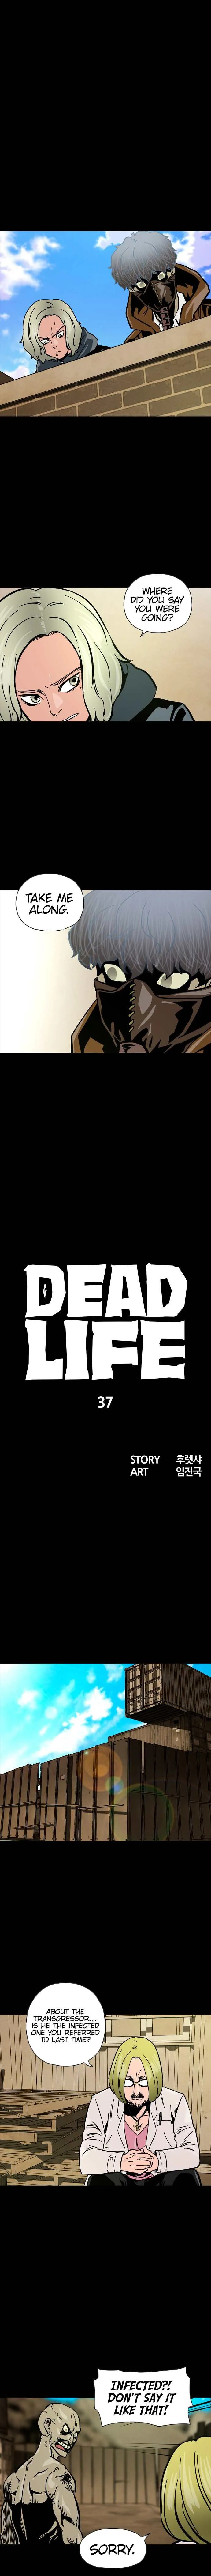 Dead Life Chapter 37 page 6